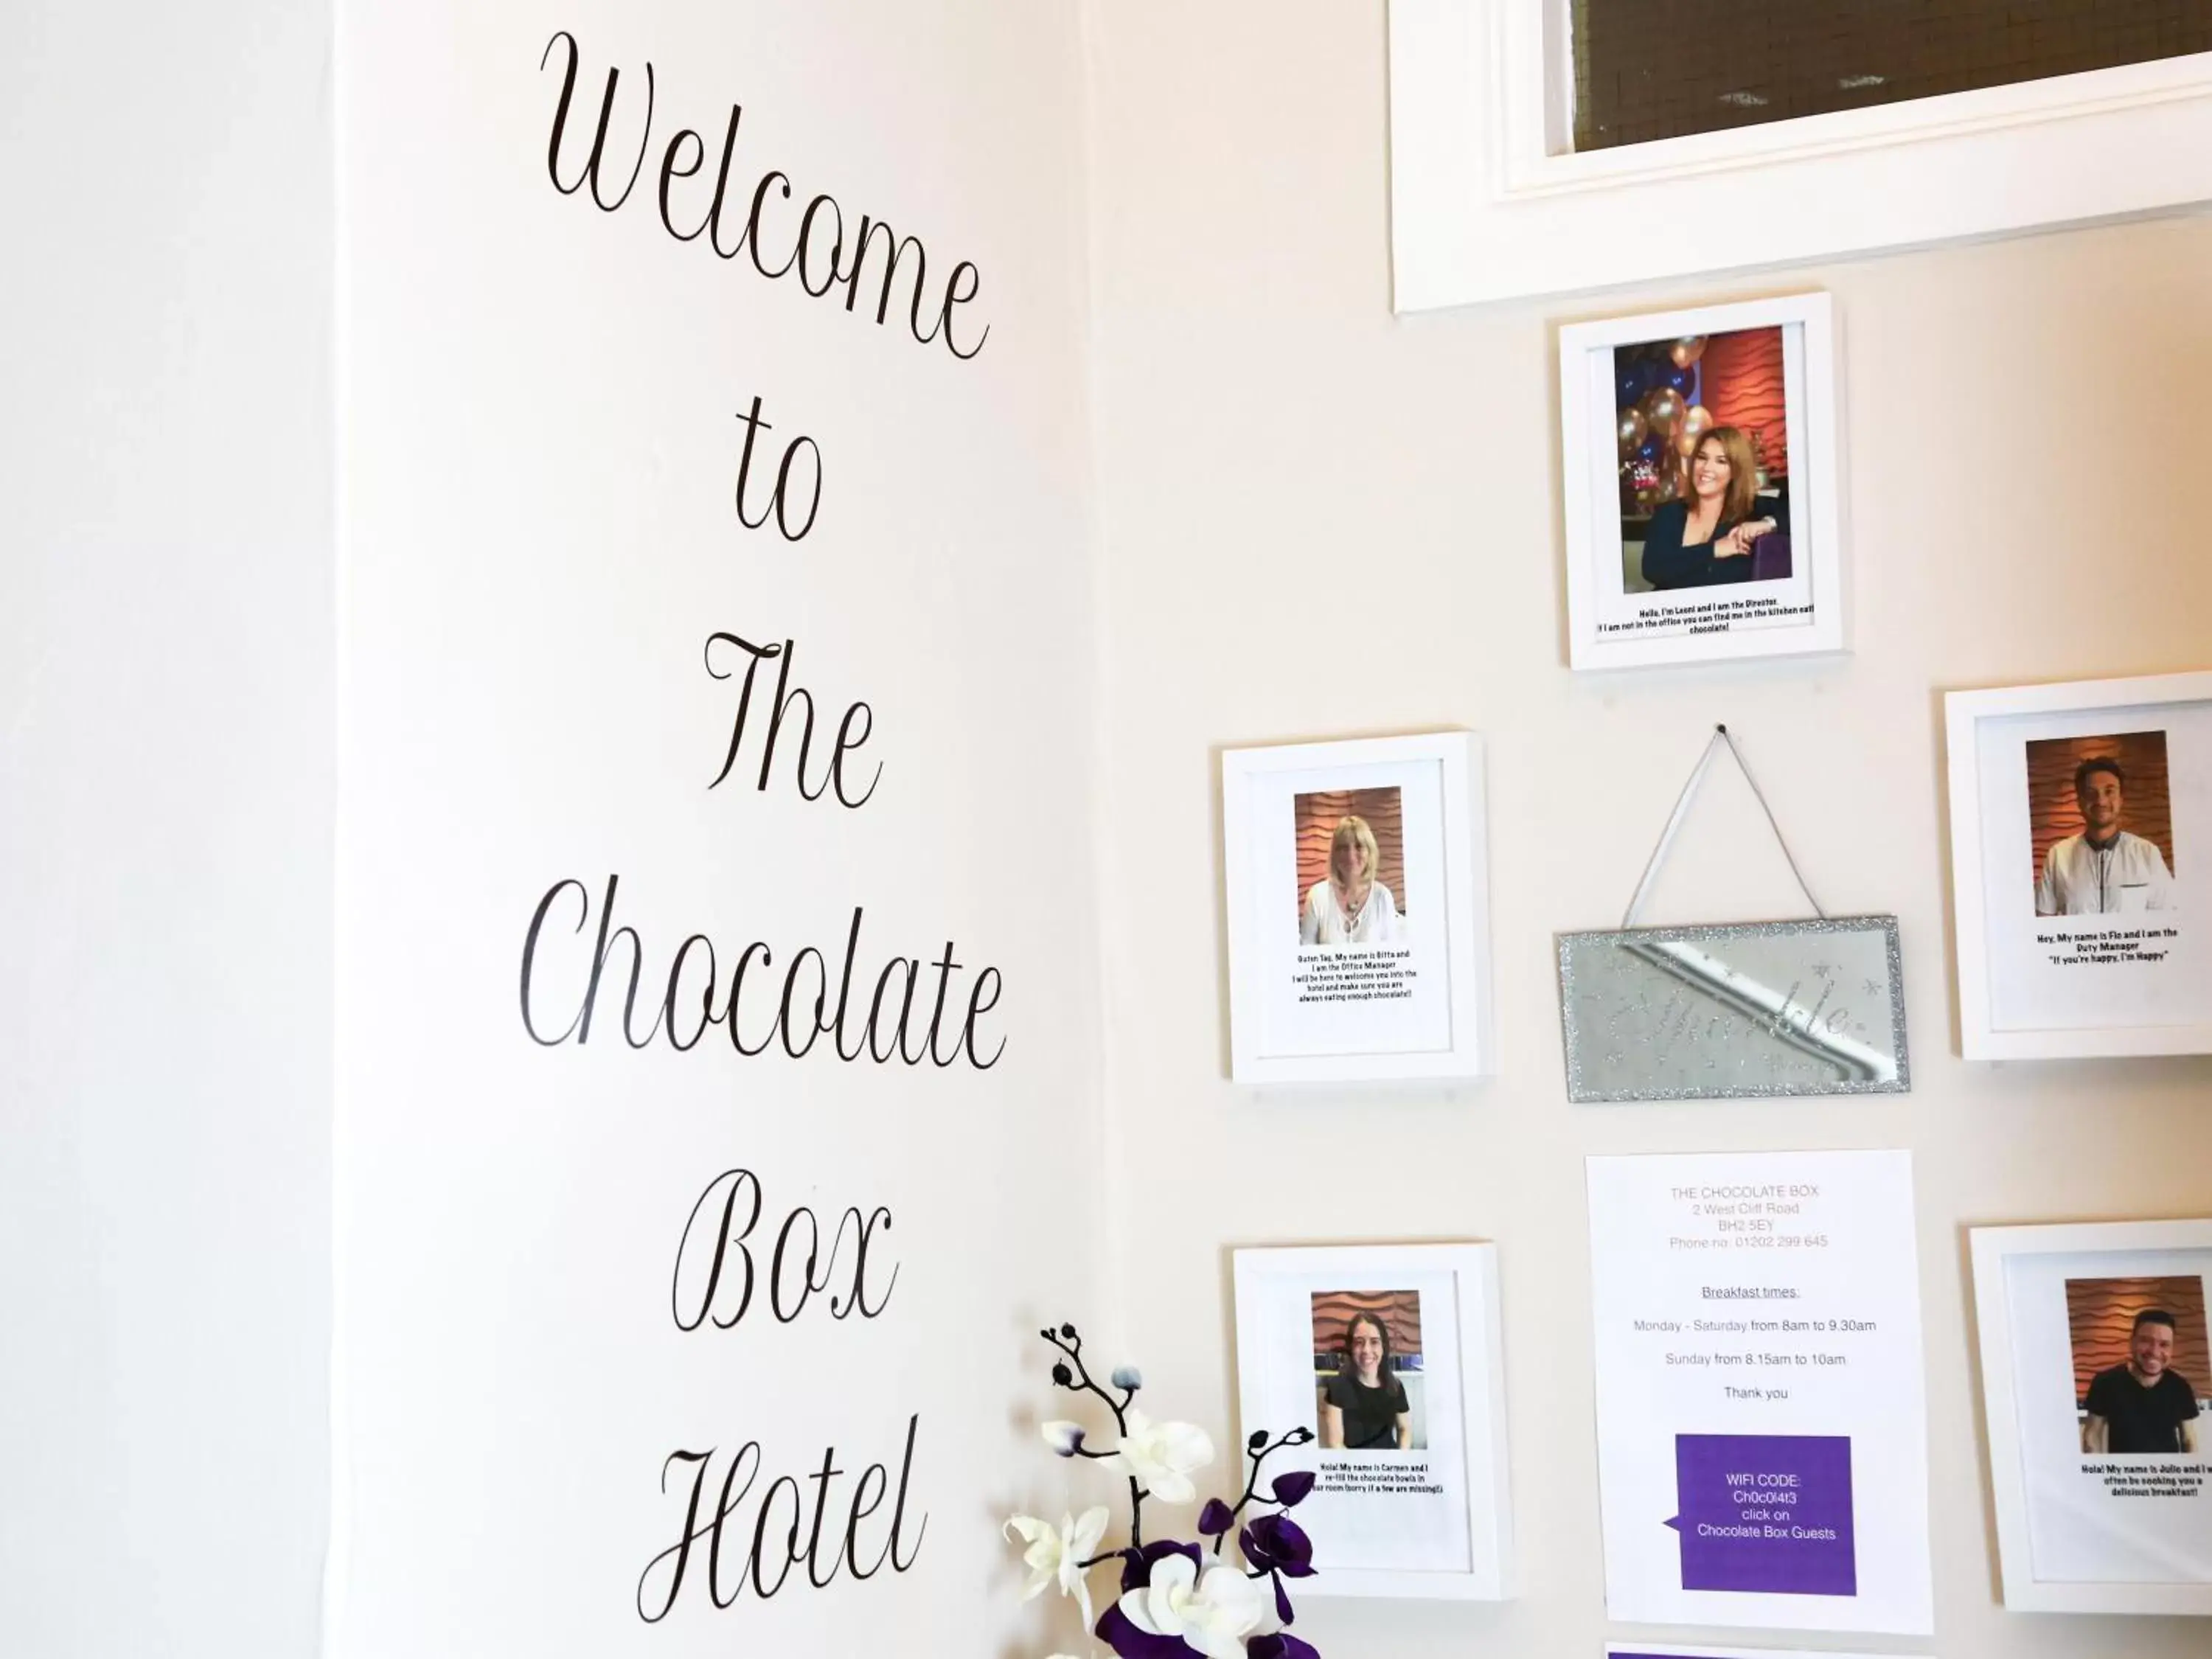 Lobby or reception in The Chocolate Box Hotel